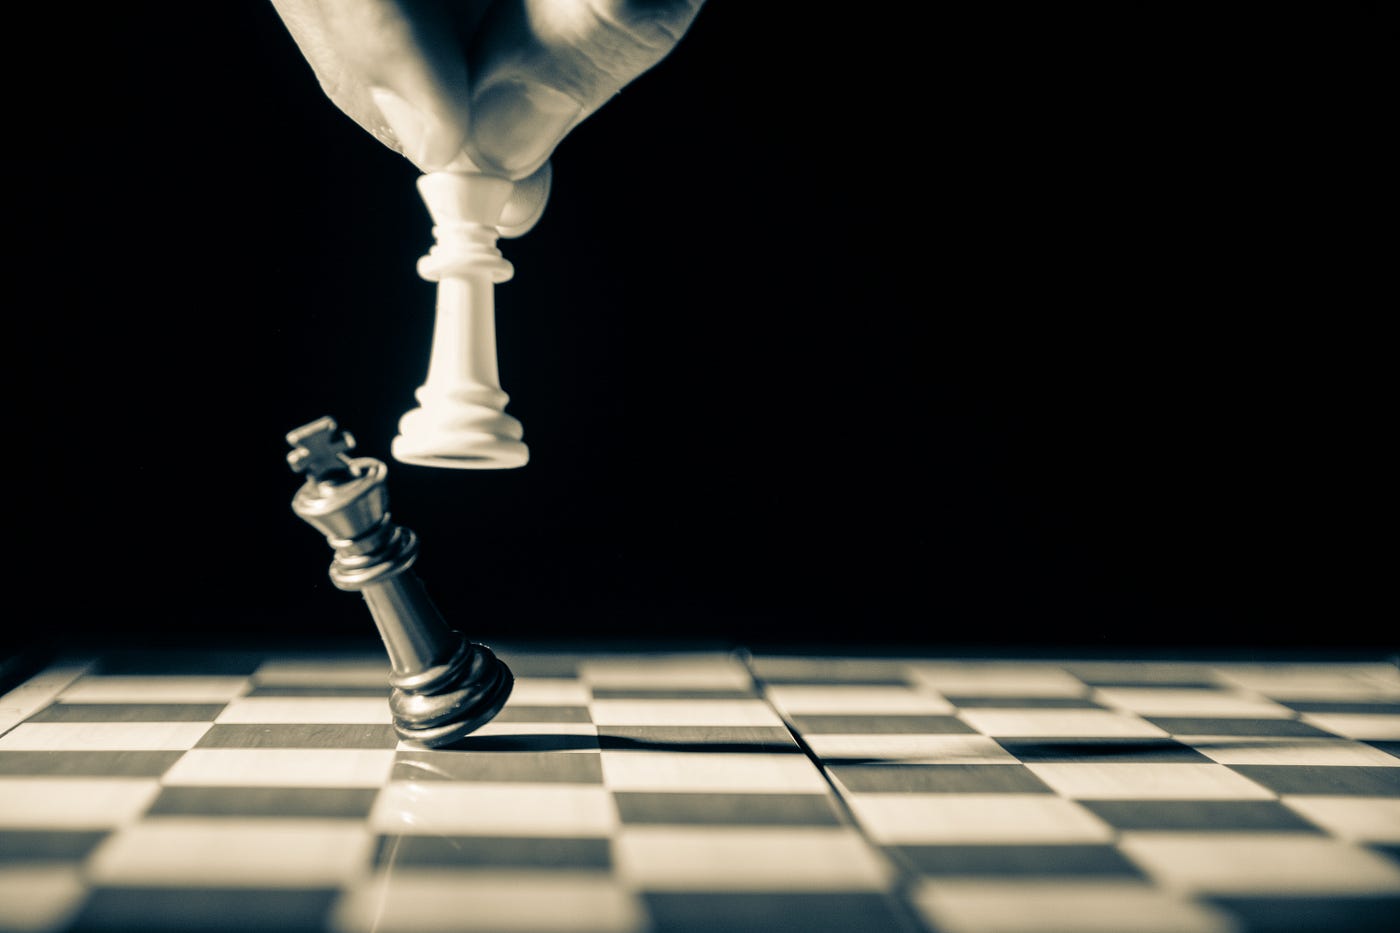 20 Years after Deep Blue: How AI Has Advanced Since Conquering Chess